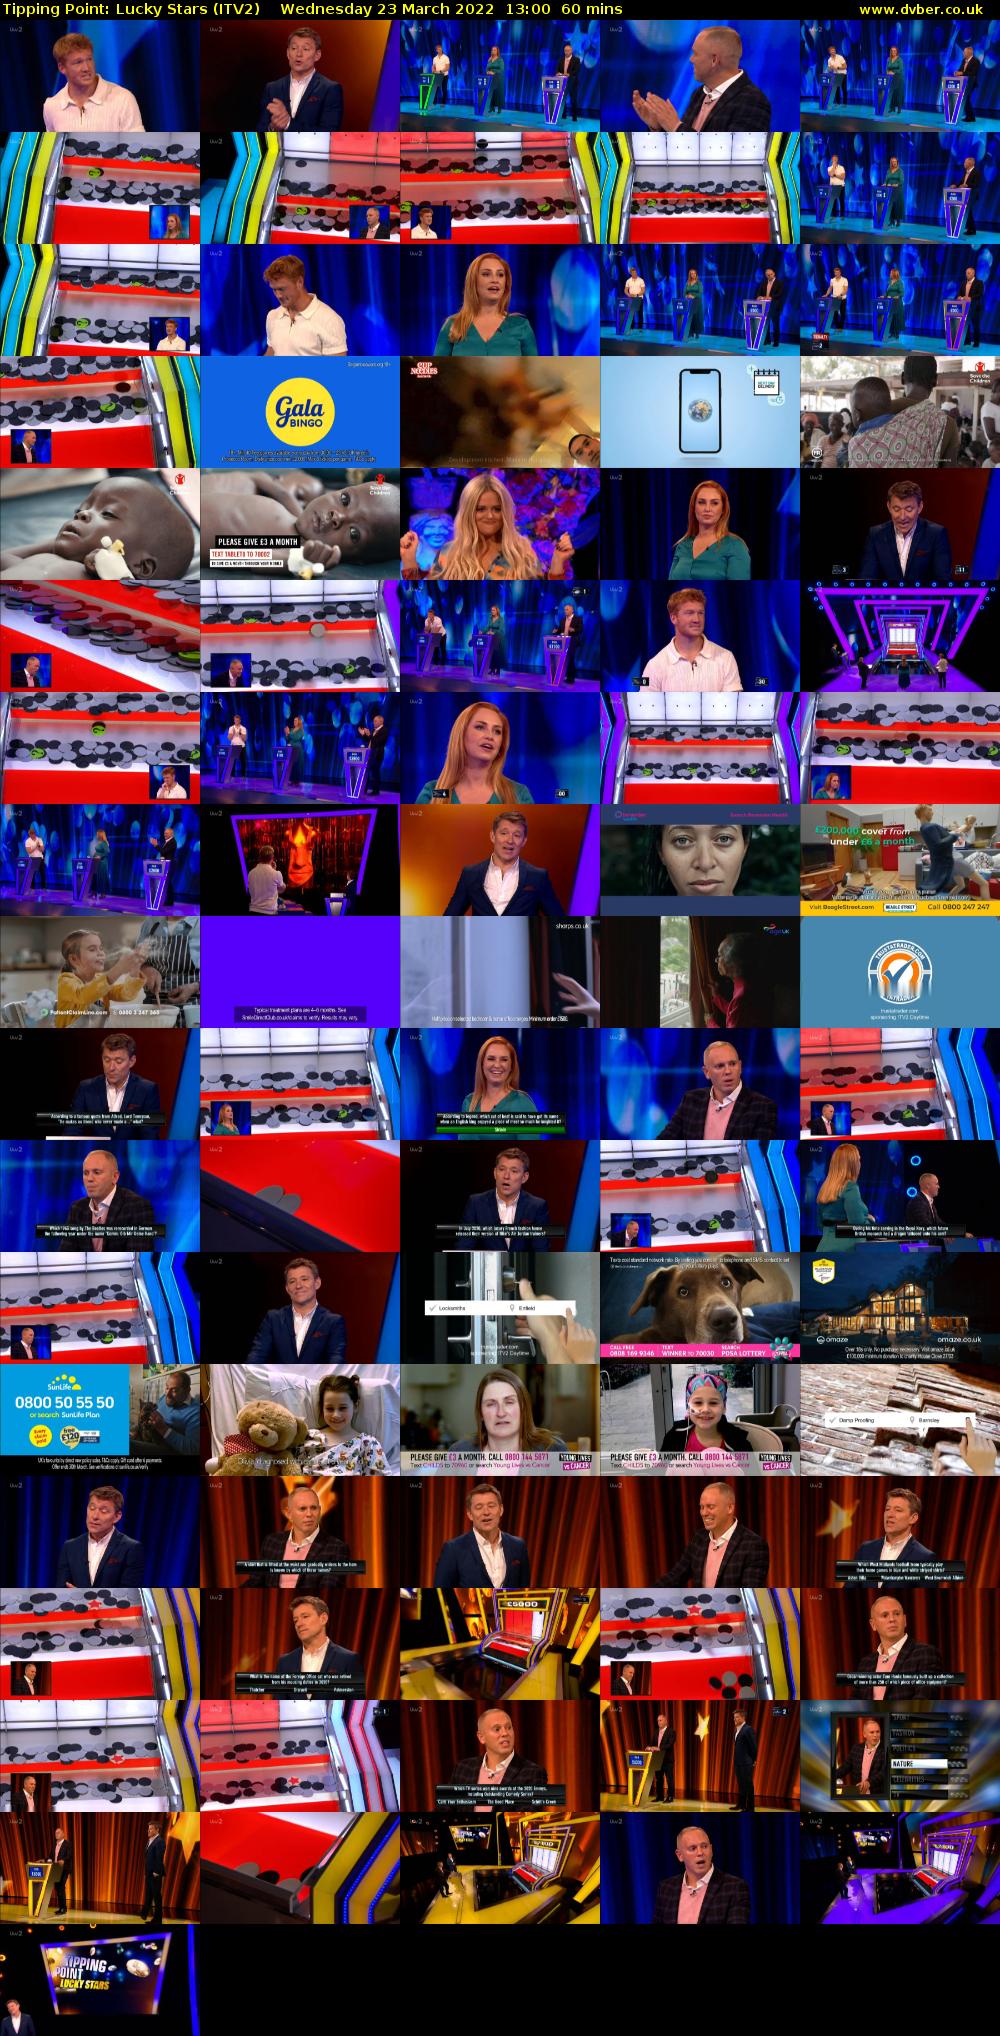 Tipping Point: Lucky Stars (ITV2) Wednesday 23 March 2022 13:00 - 14:00